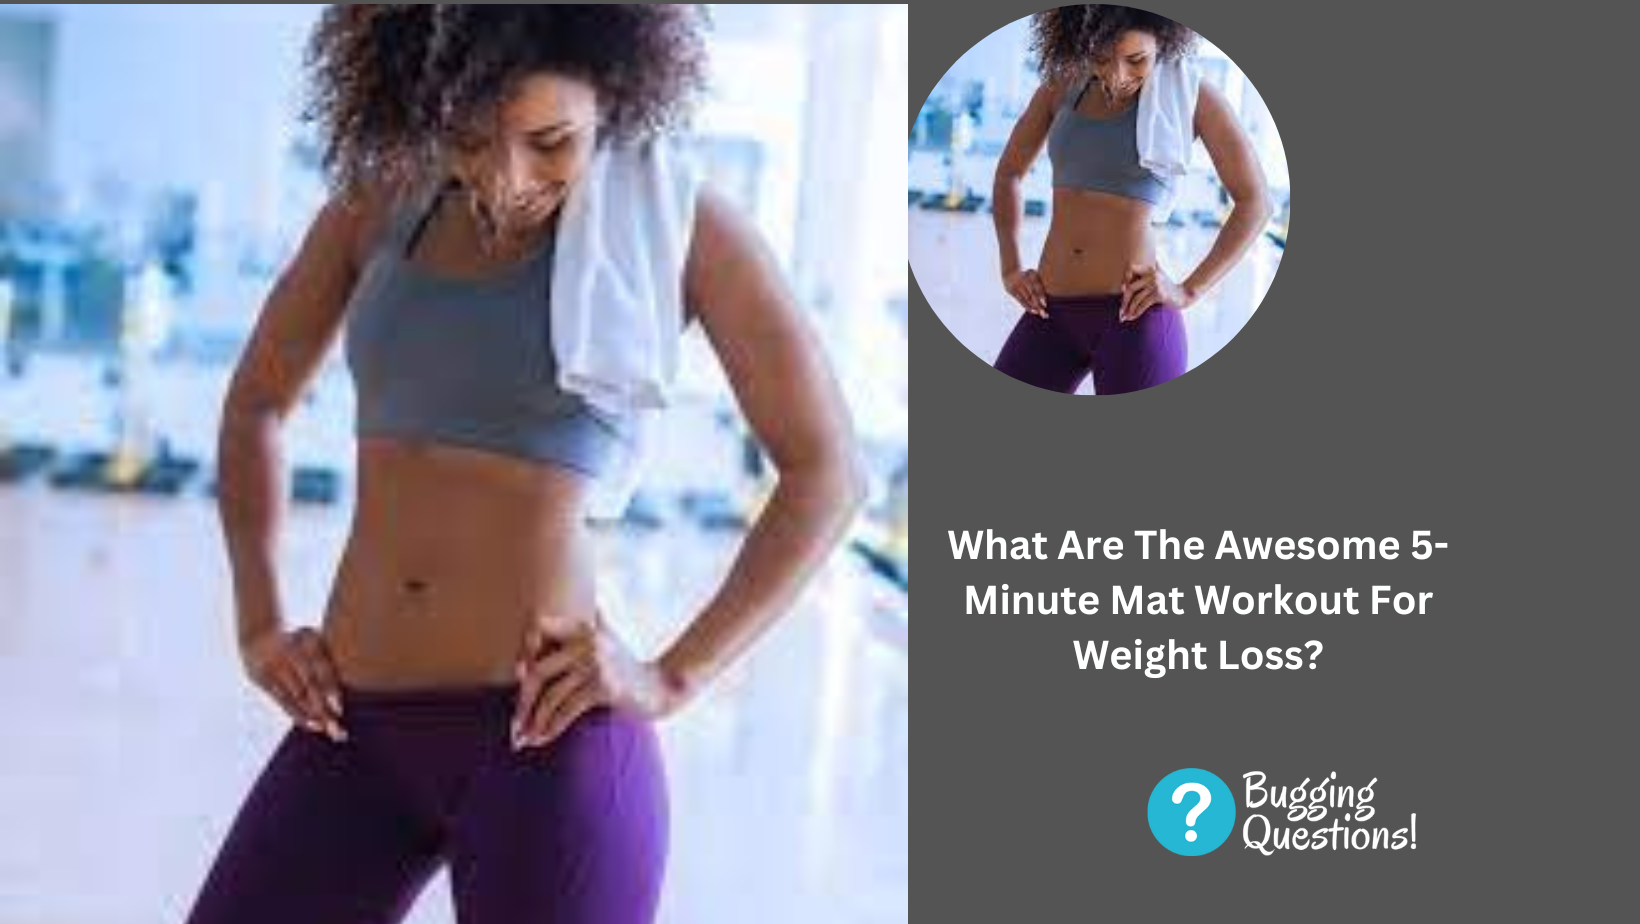 What Are The Awesome 5-Minute Mat Workout For Weight Loss?